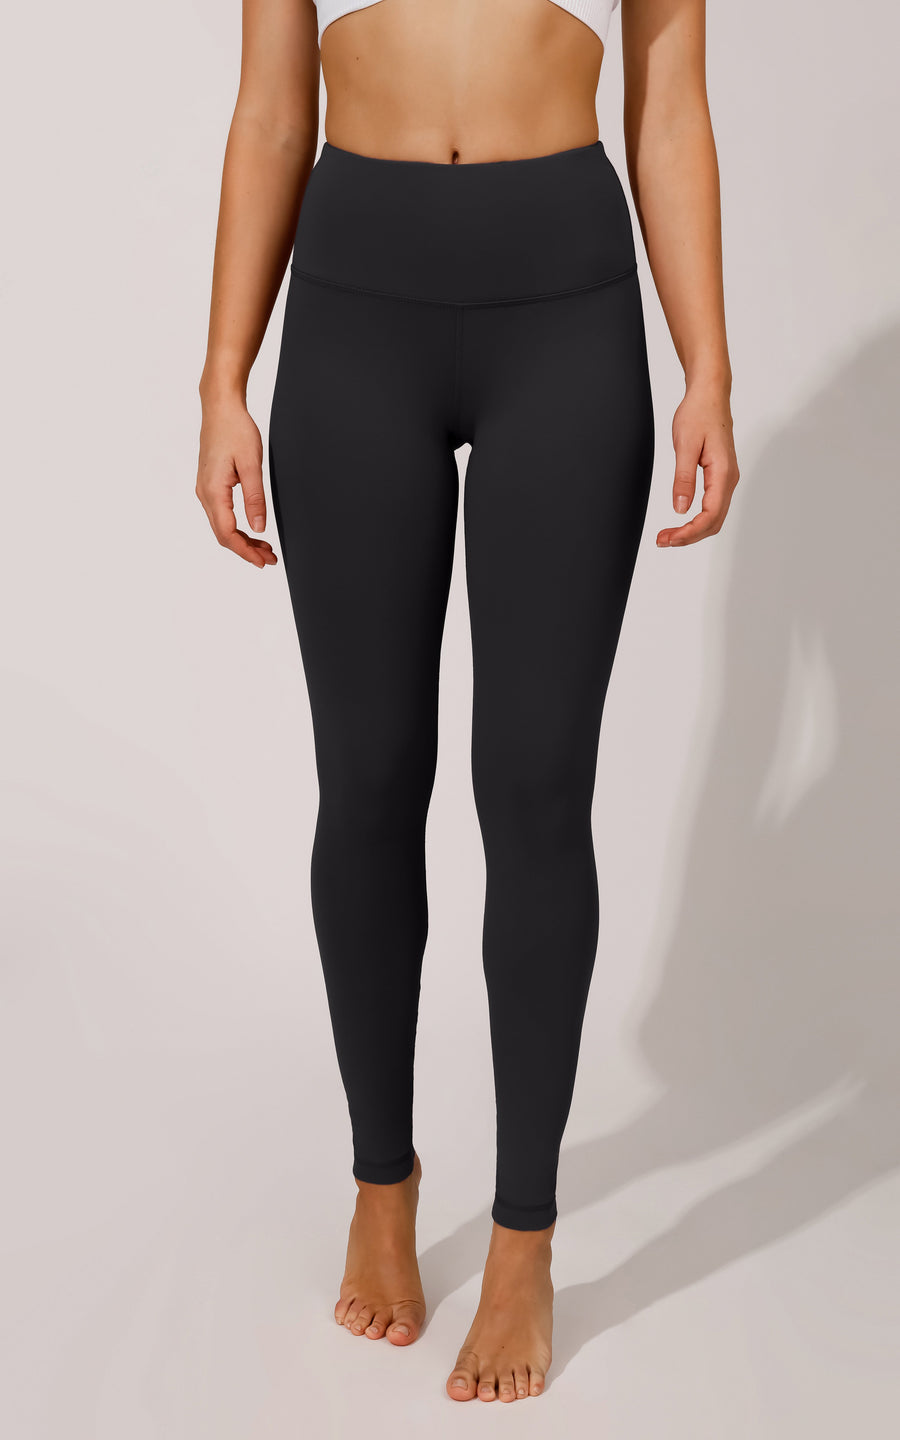 SAN DIEGO CA 🇺🇸  Luxury Booty Leggings. Flare Cut with Center